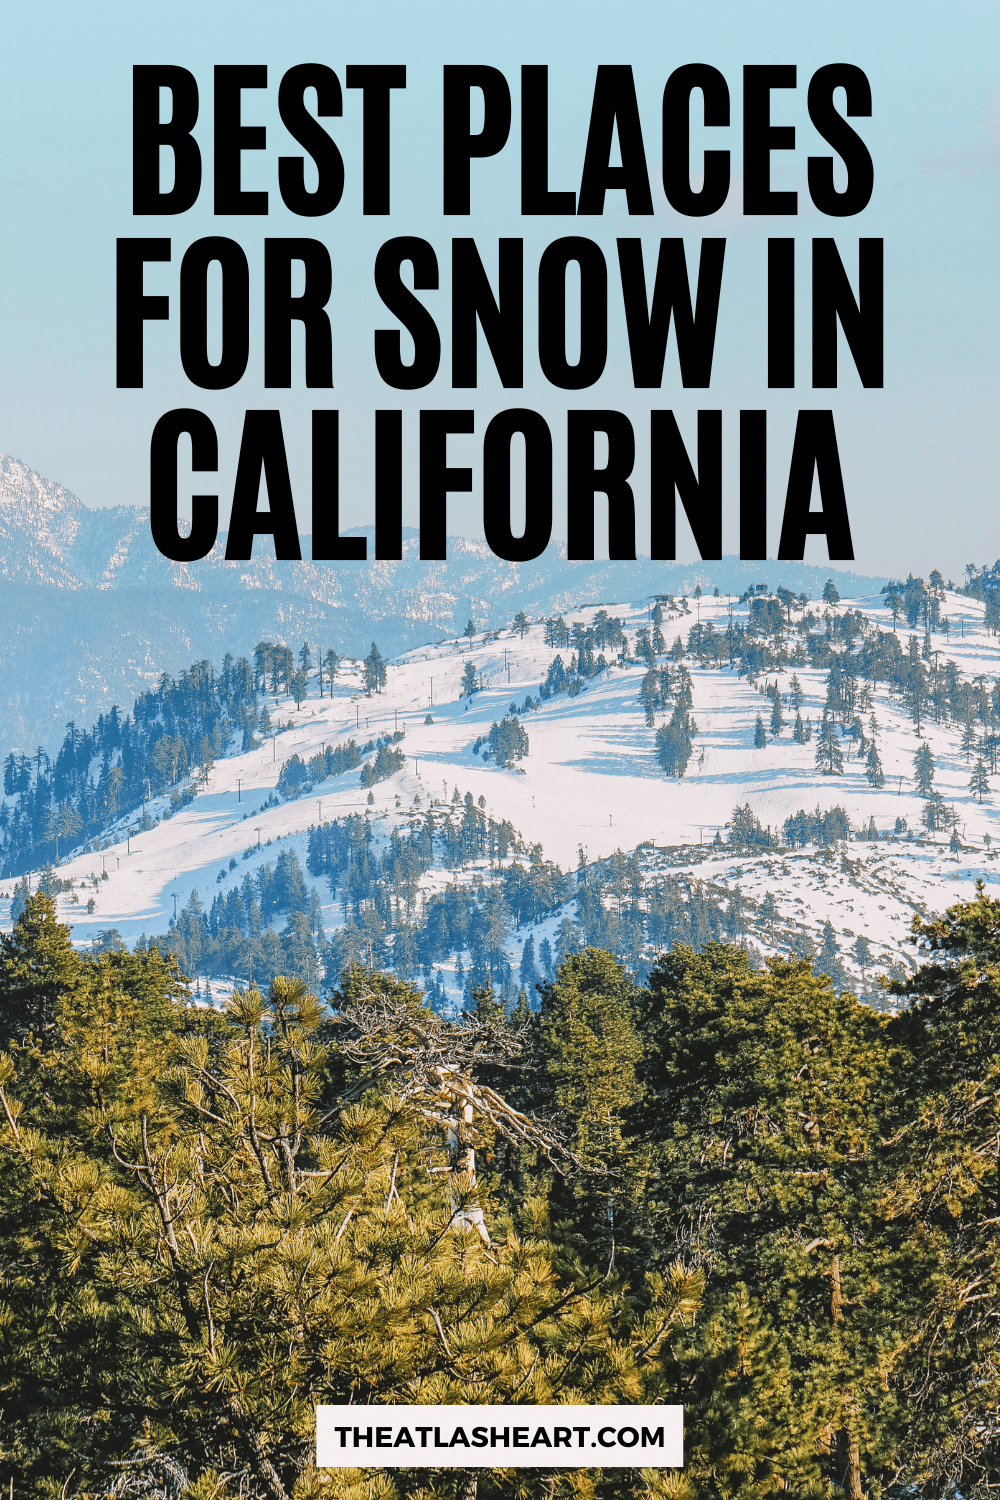 23 Best Places for Snow in California to Enjoy a Beautiful Winter Getaway